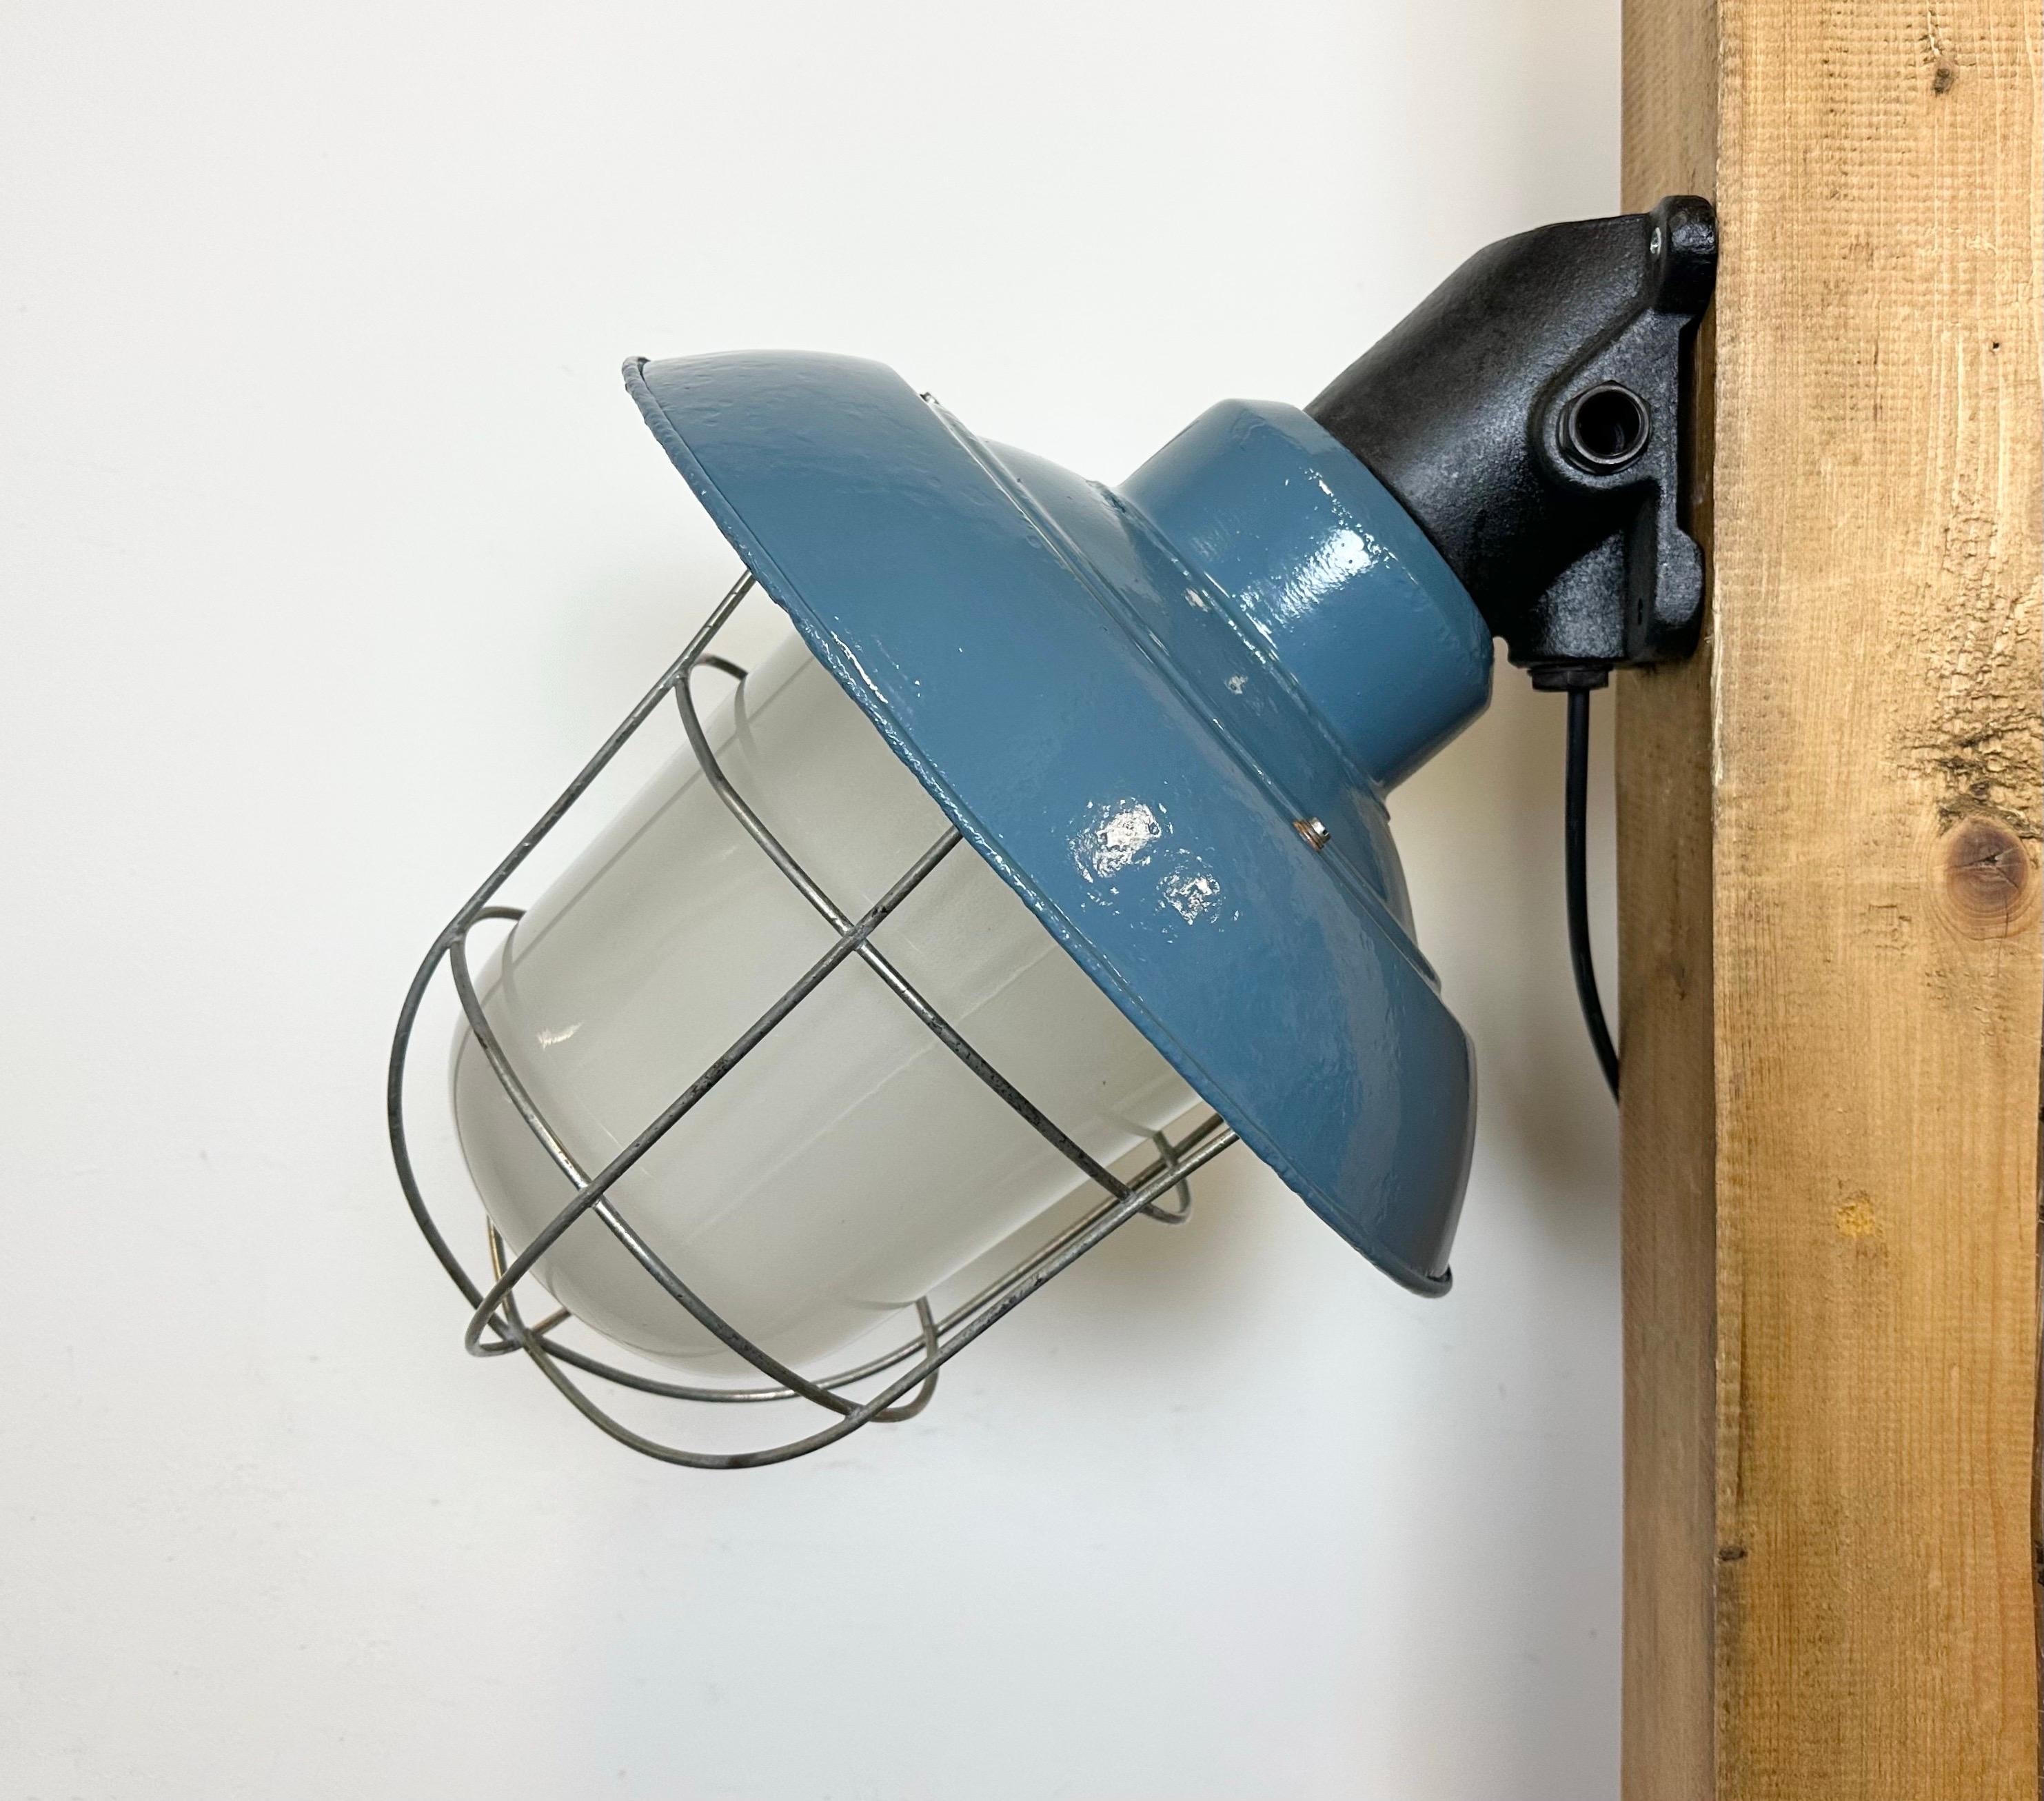 This Industrial wall lamp was designed in the 1960s and produced by Elektrosvit in the former Czechoslovakia. It features a black cast iron wall mounting, a newly blue painted shade with a white enamel interior, a milk glass cover and an iron grid.